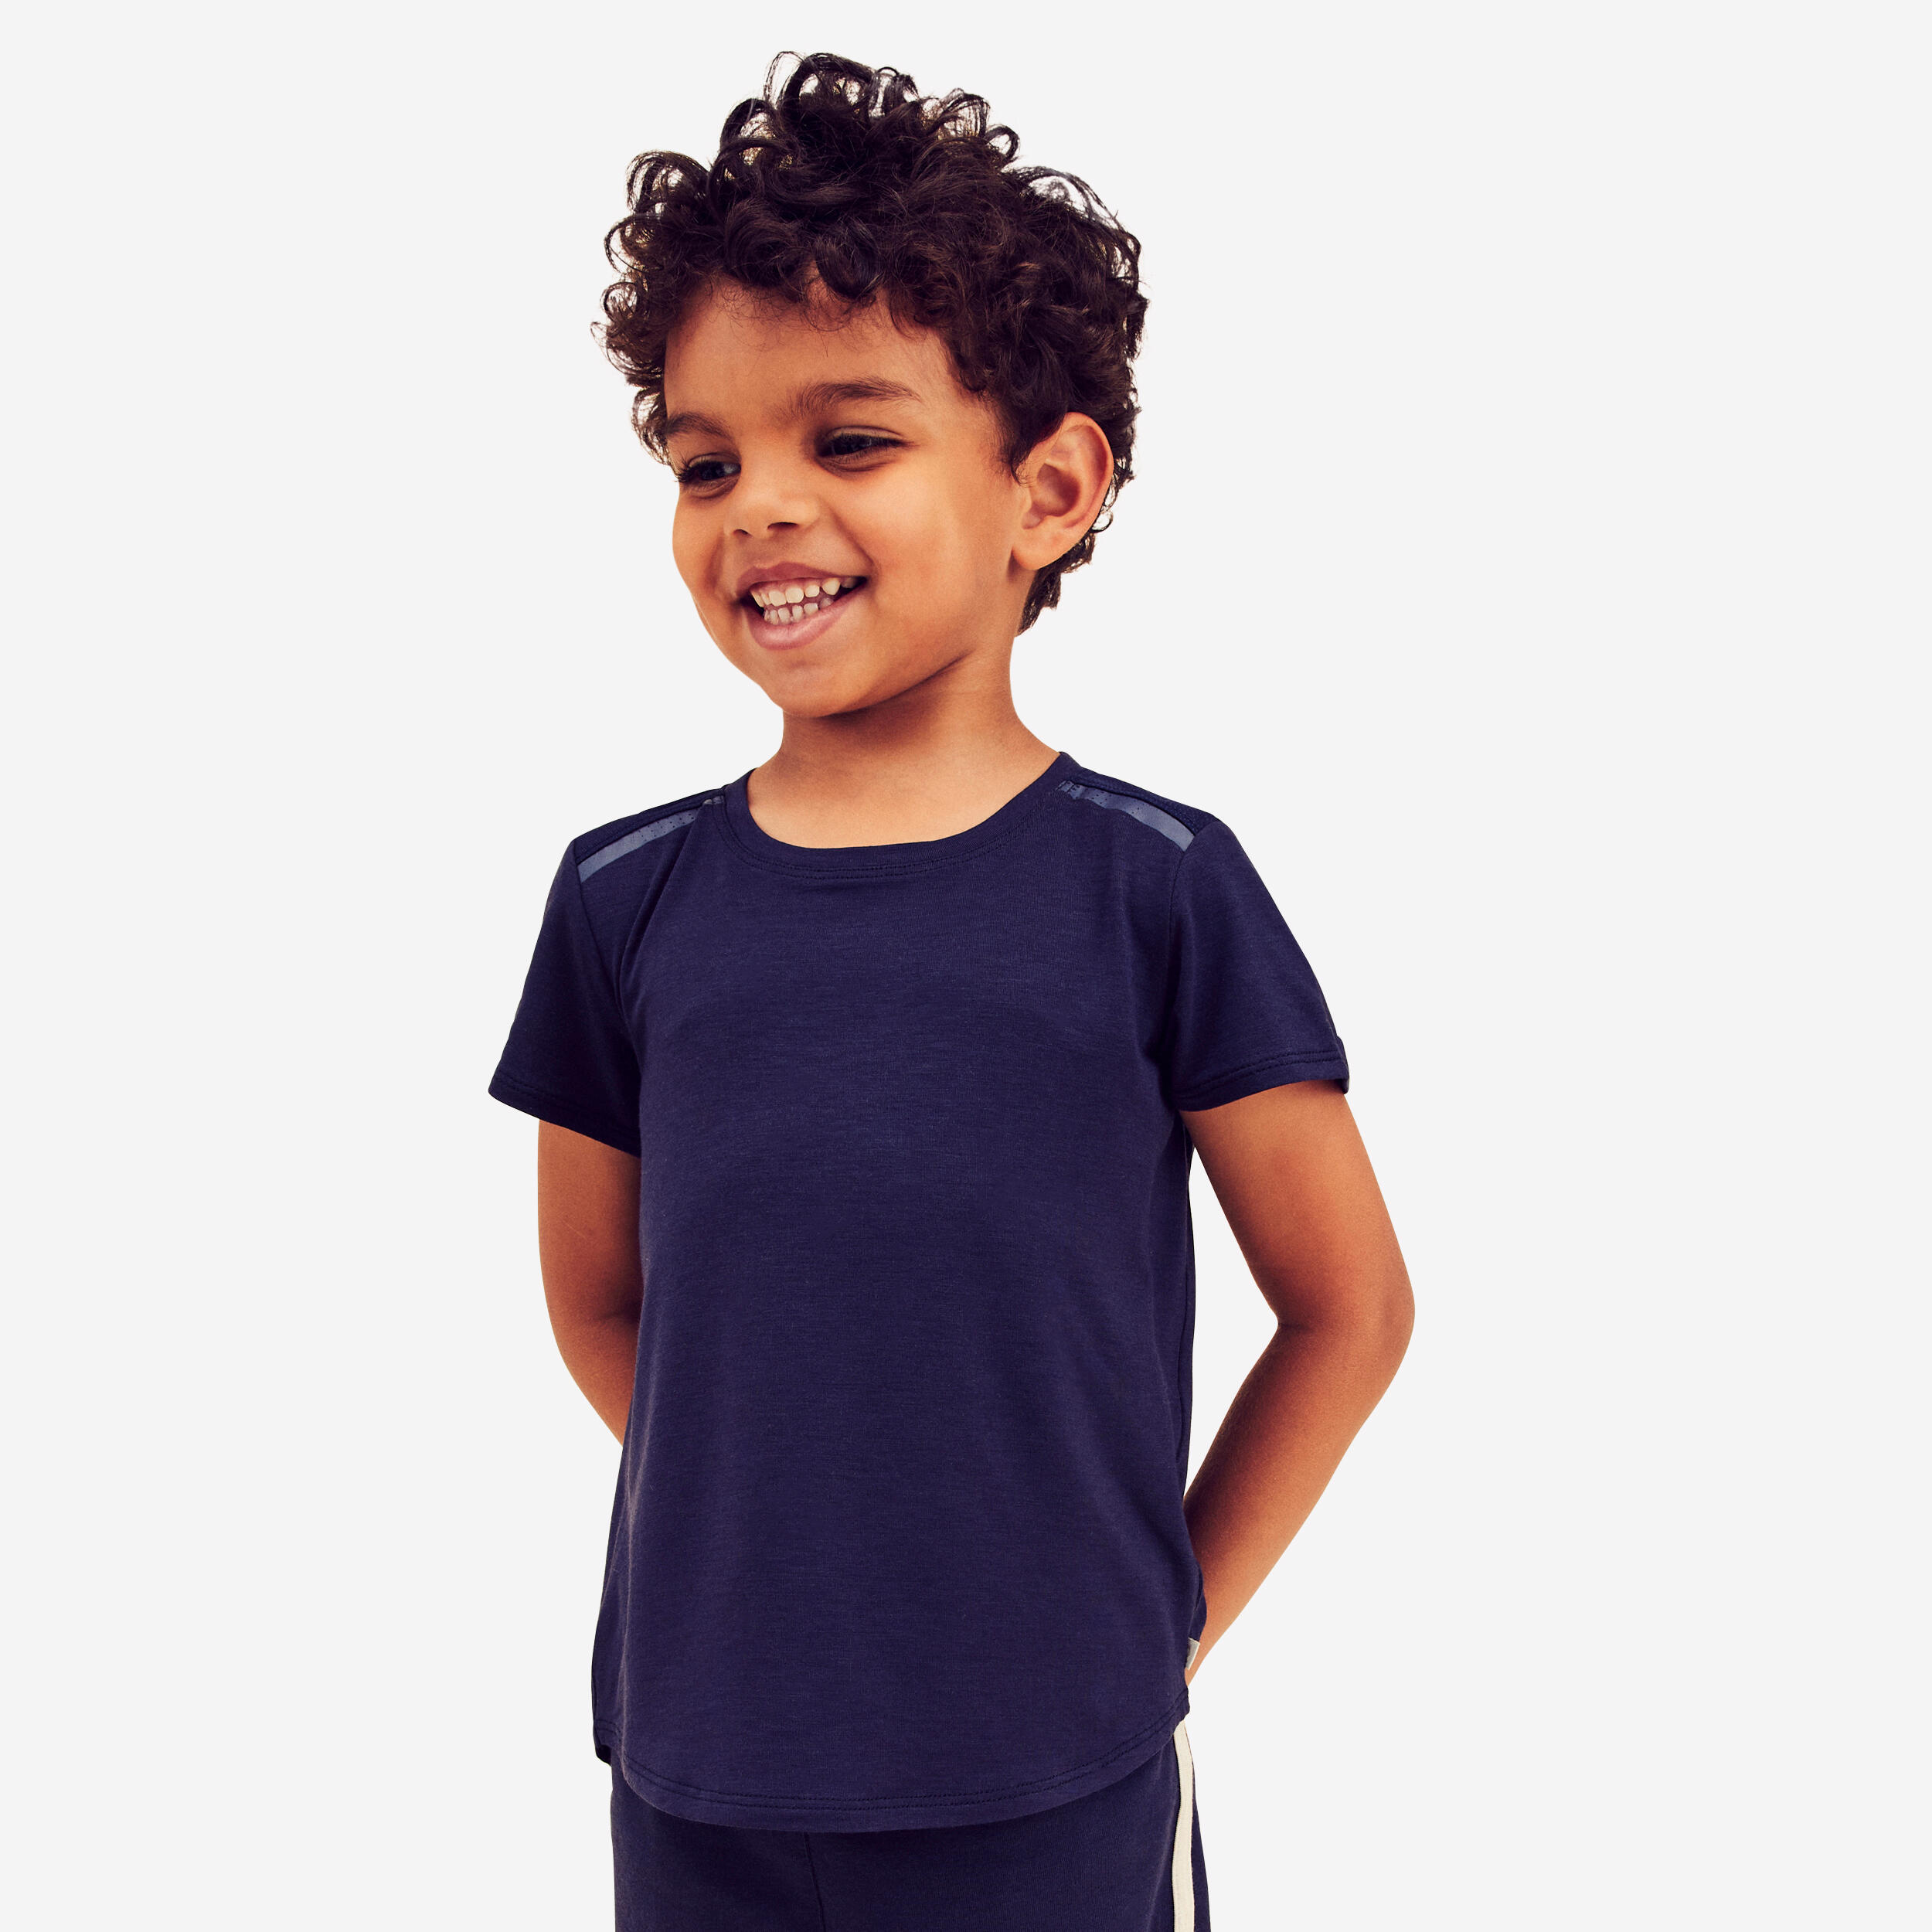 DOMYOS Baby Light and Breathable T-Shirt 500 - Navy Blue